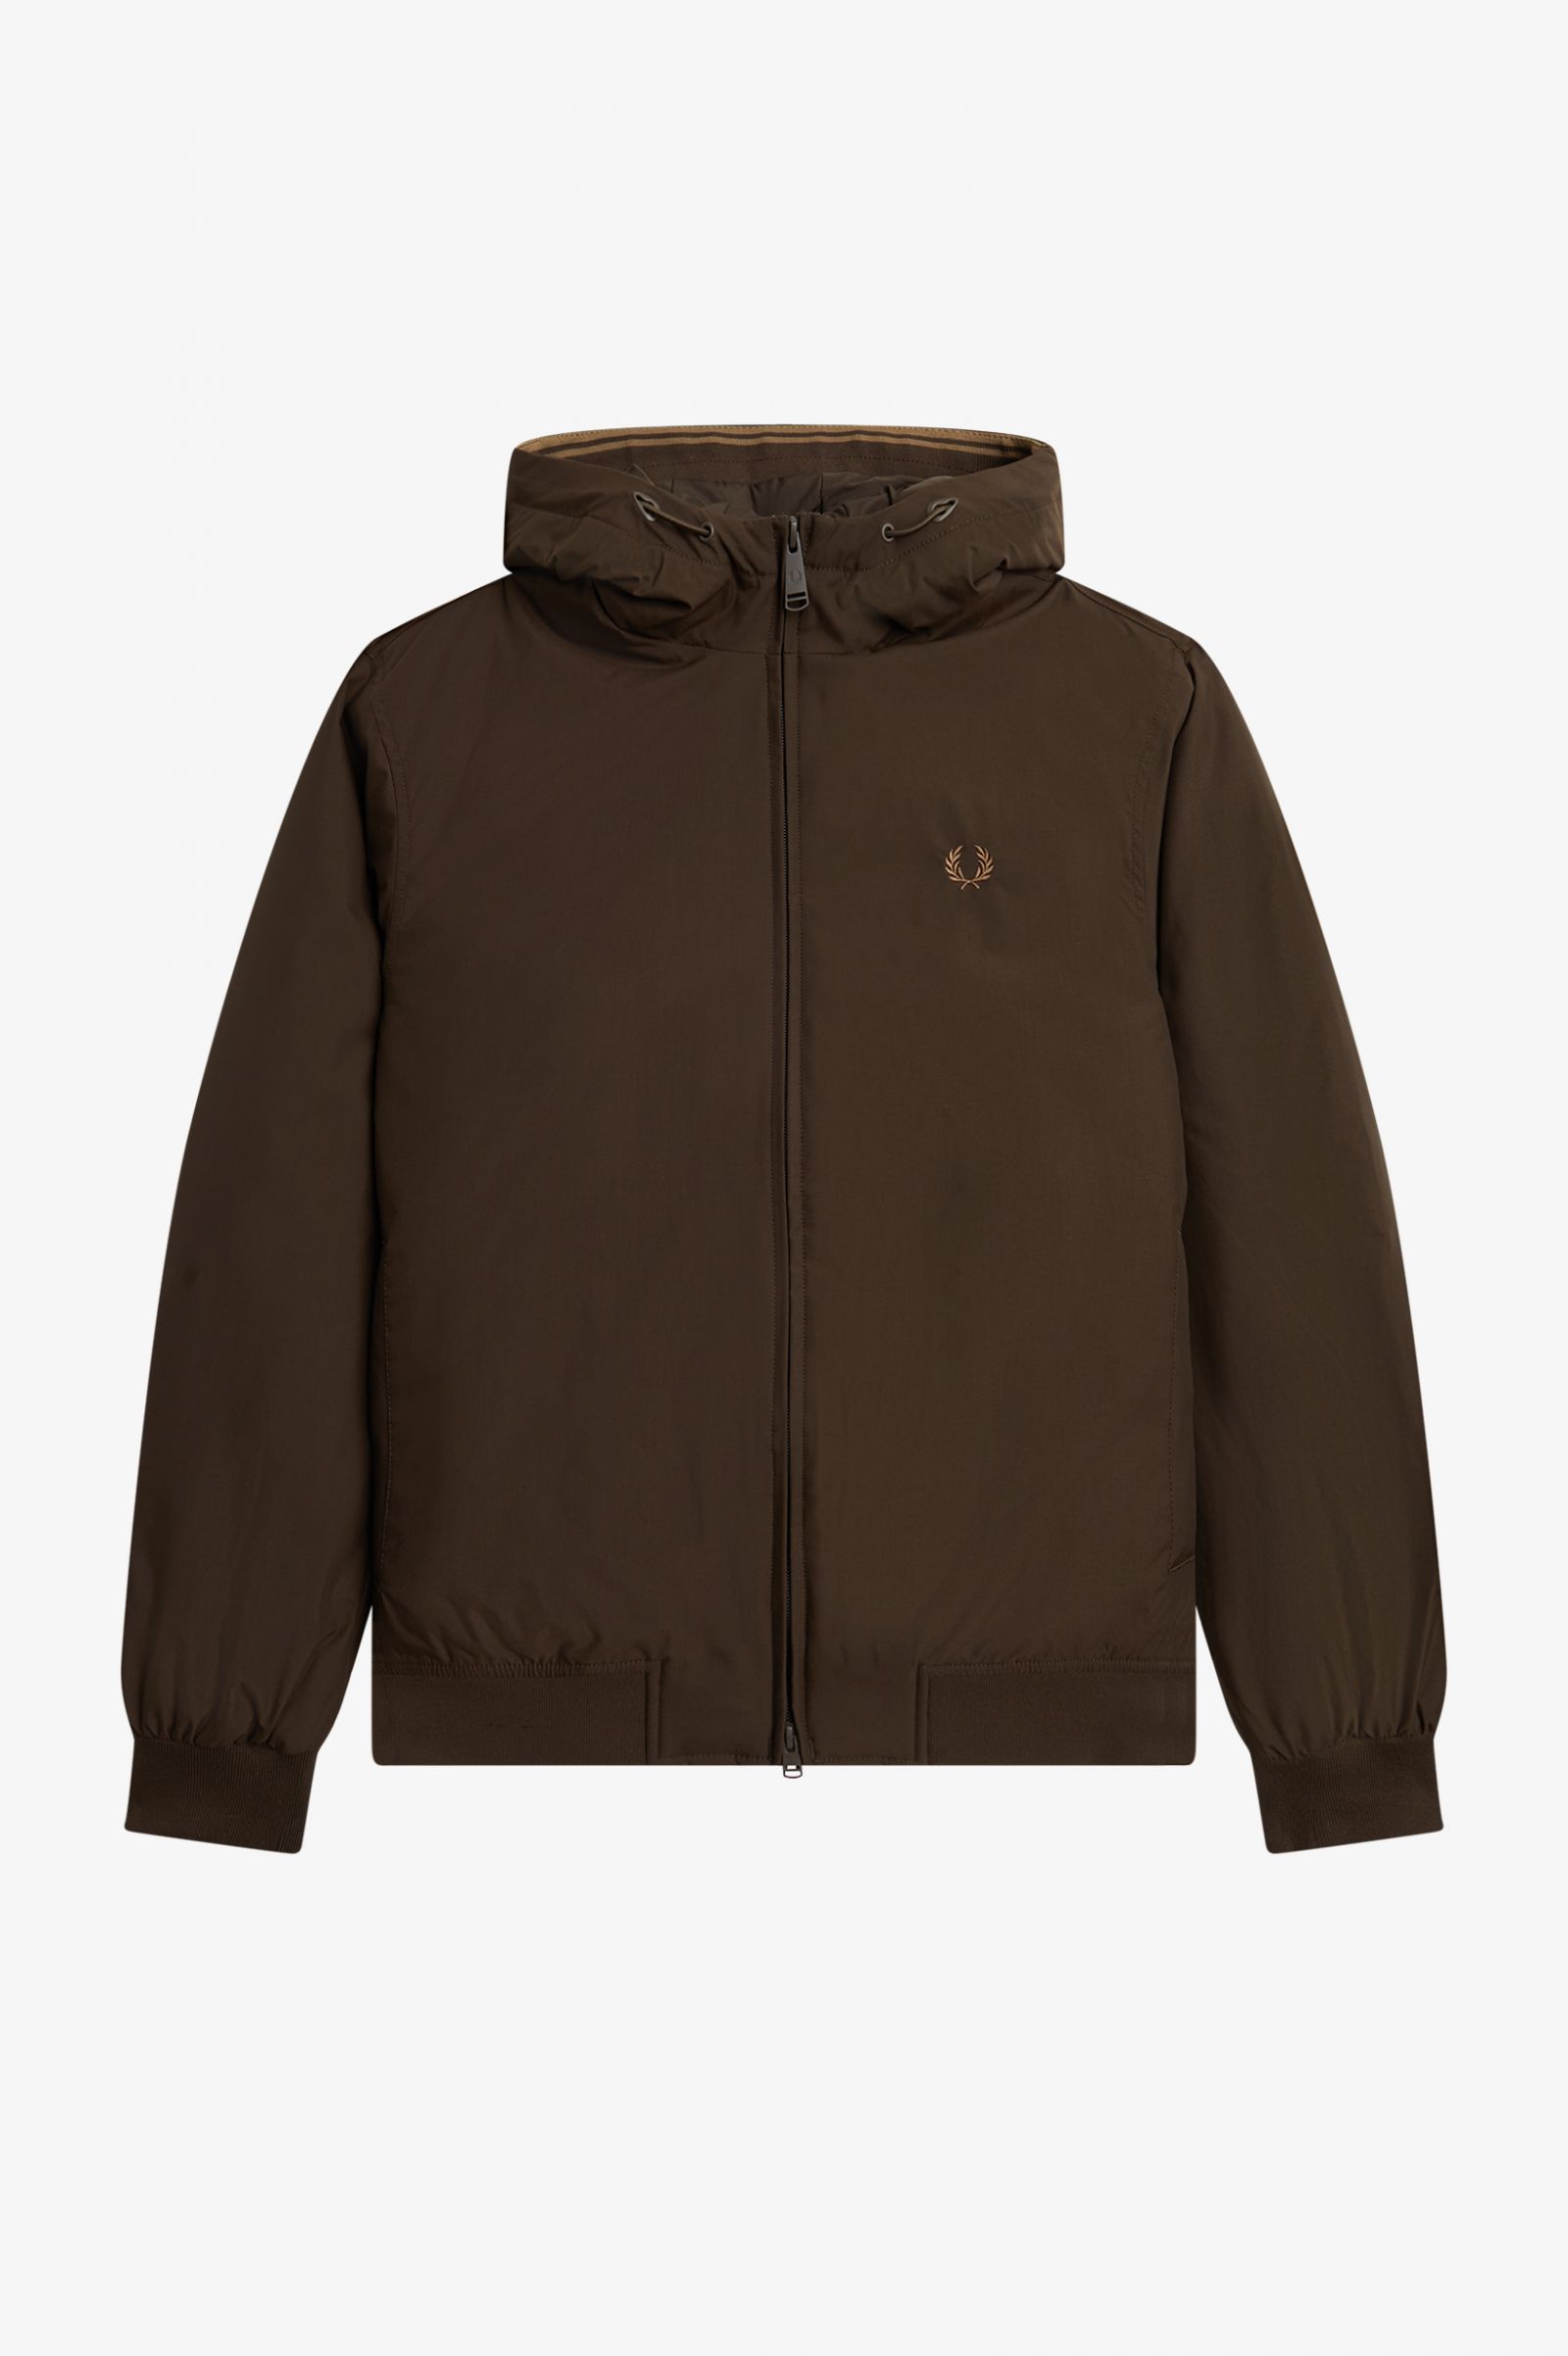 Fred Perry Paded Hooded Jacket in Burnt Tobacco